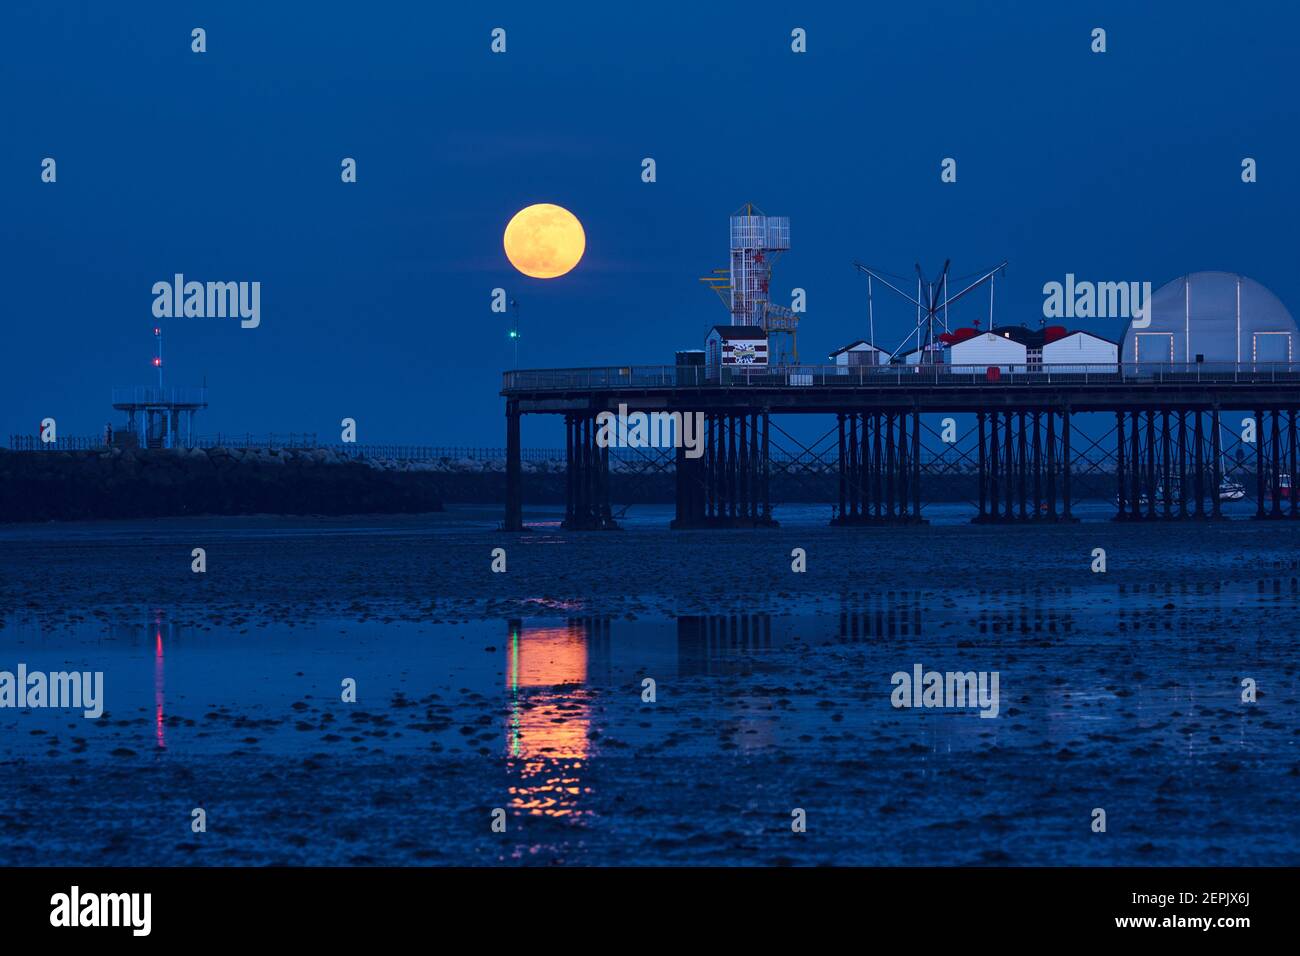 Herne Bay, Kent, UK. 27th February 2021: UK Weather. Full snow moon just Waning Gibbous rises into a clear sky over Herne Bay pier at the end of a fine day, during the blue hour after sunset. Credit: Alan Payton/Alamy Live News Stock Photo